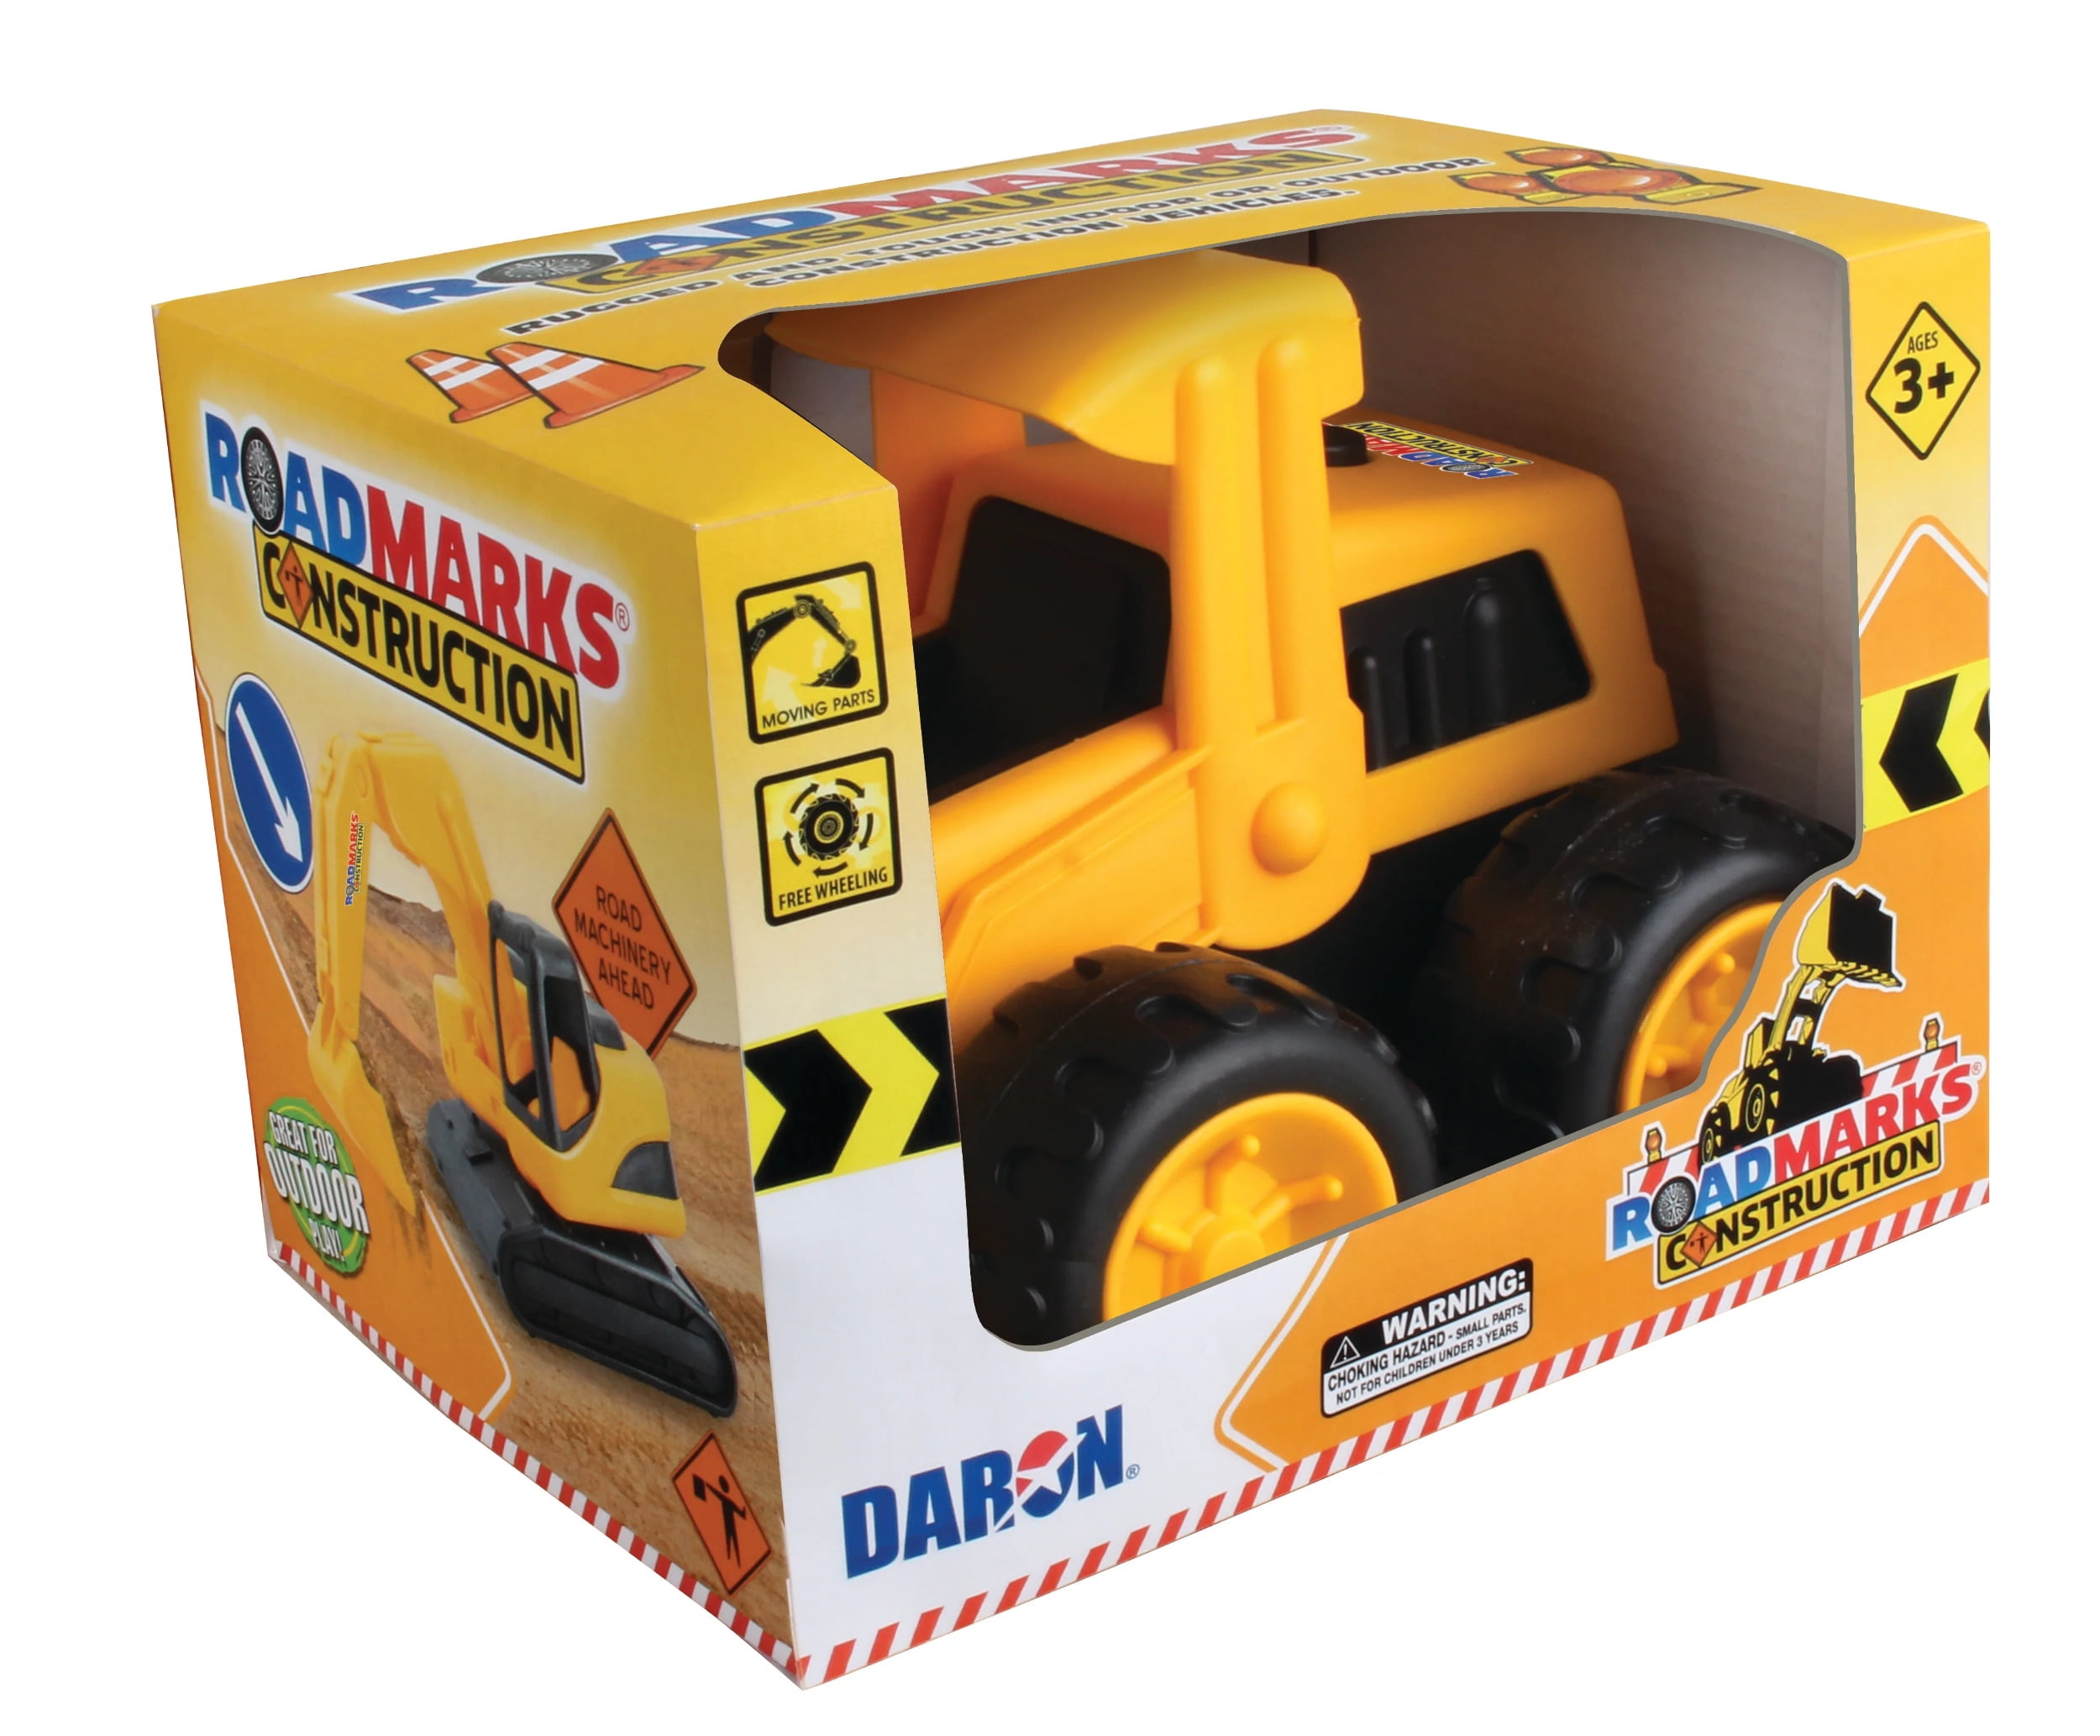 Picture of Road Marks RM5100 Construction Front Loader Toy